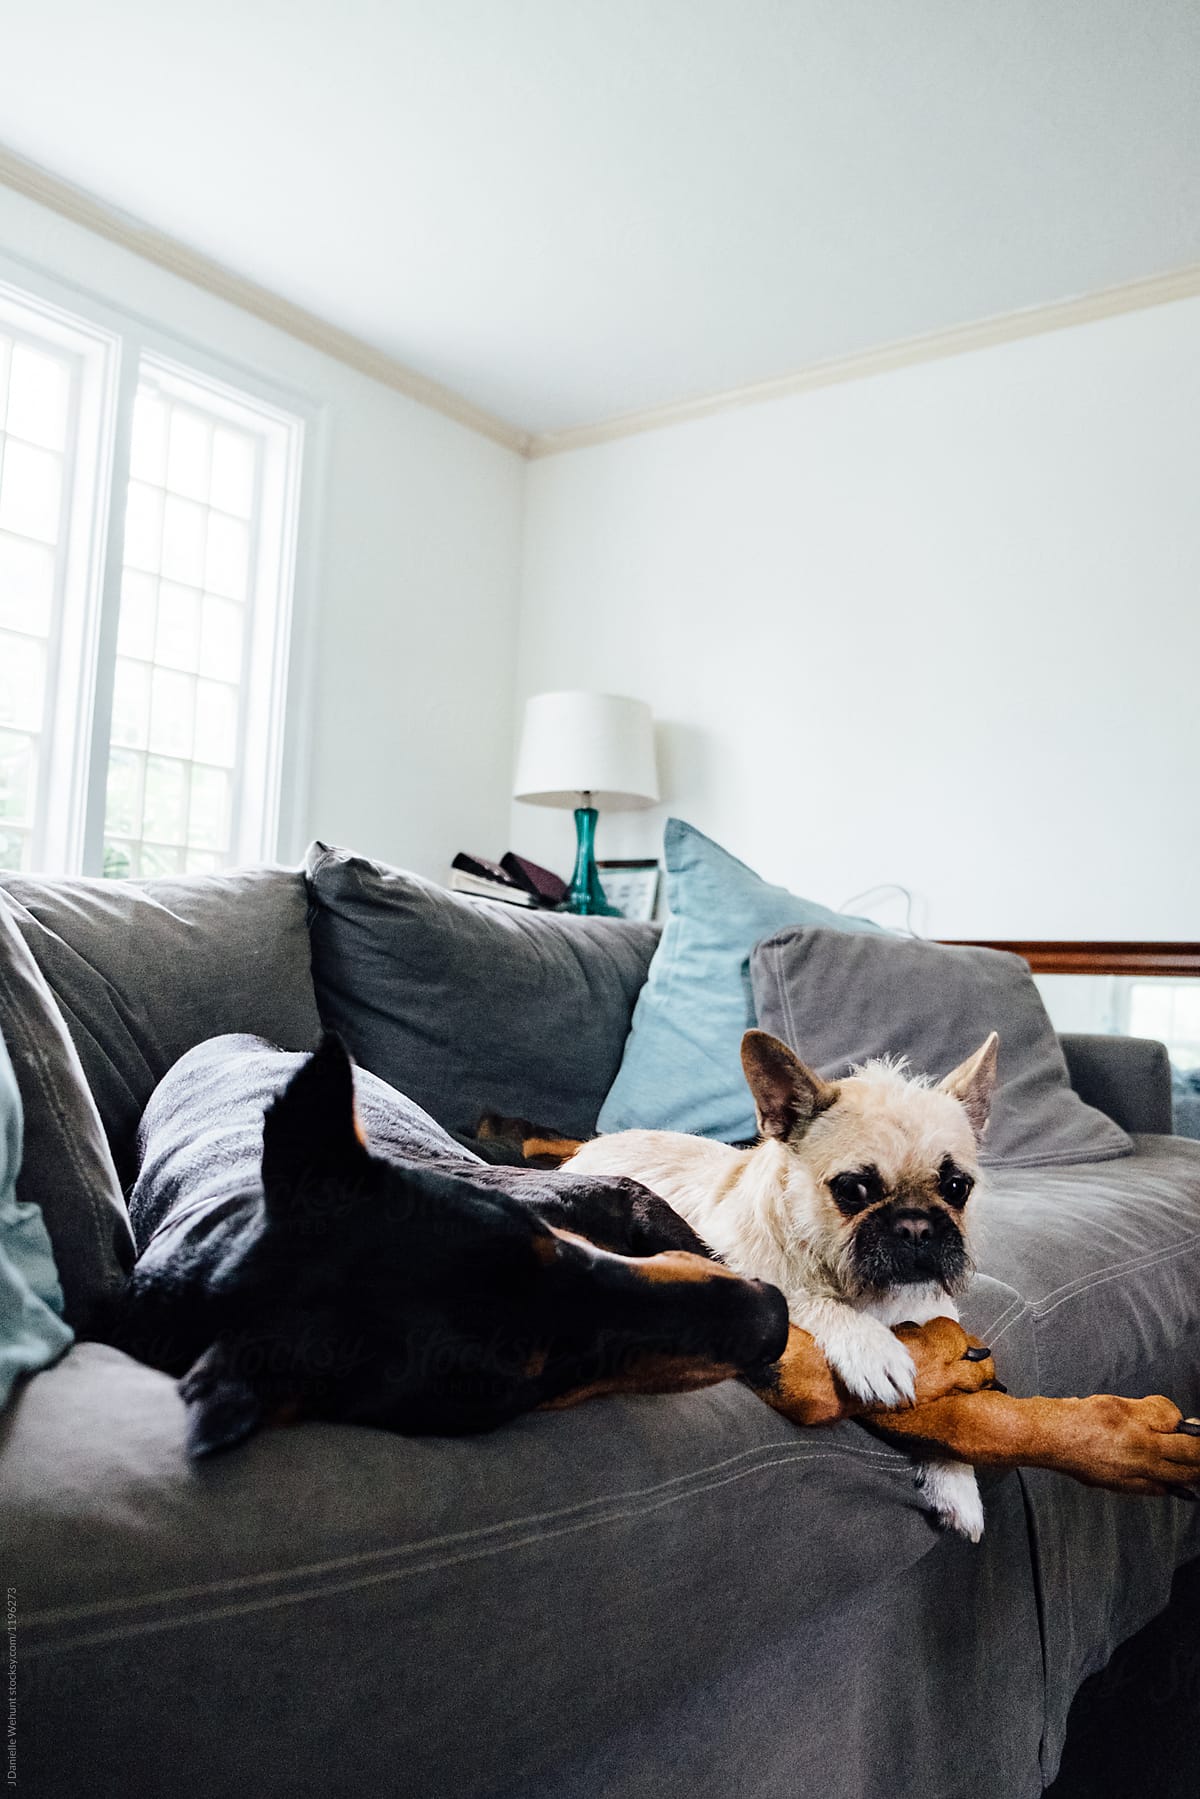 Doberman Pinscher And French Bulldog Shih Tzu Mix Sitting On The Back Of Couch" by Stocksy Contributor "J Danielle Wehunt" - Stocksy